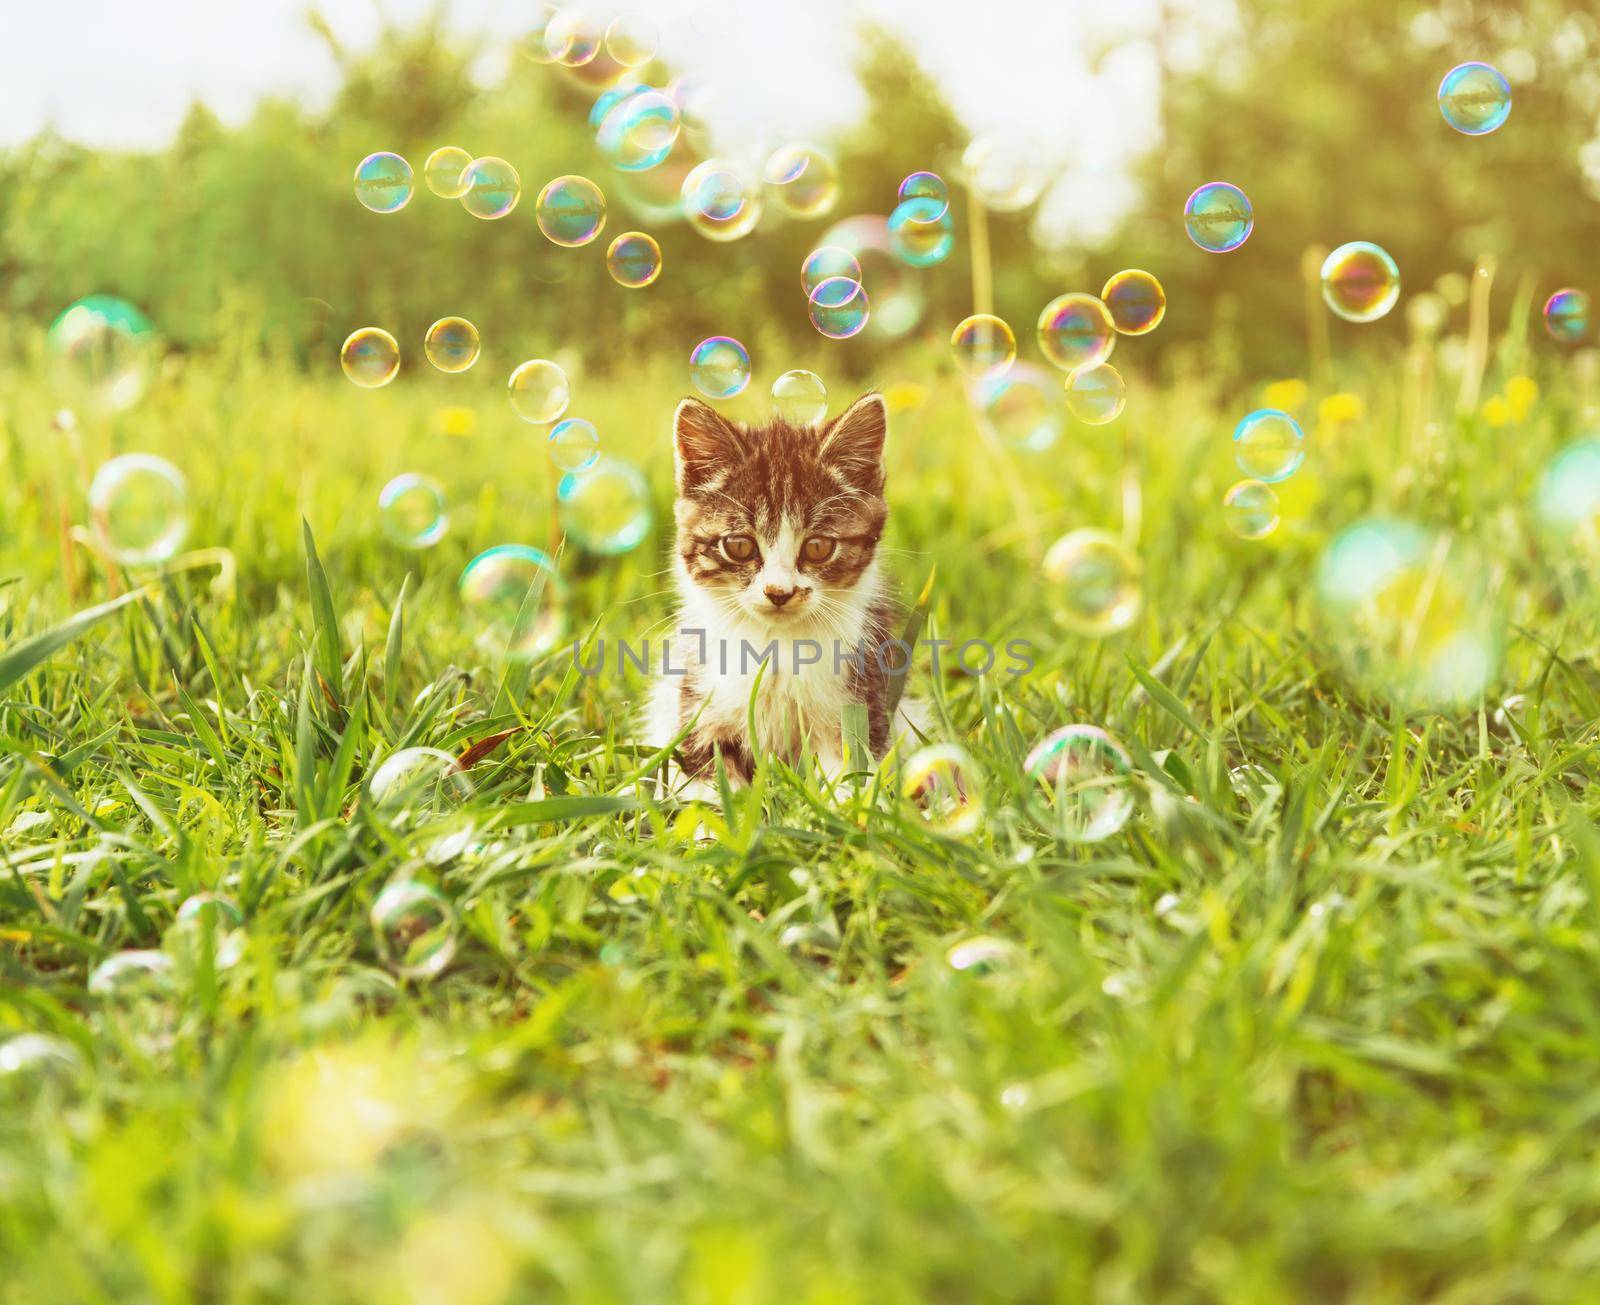 Kitten outdoors at sunny day by alexAleksei